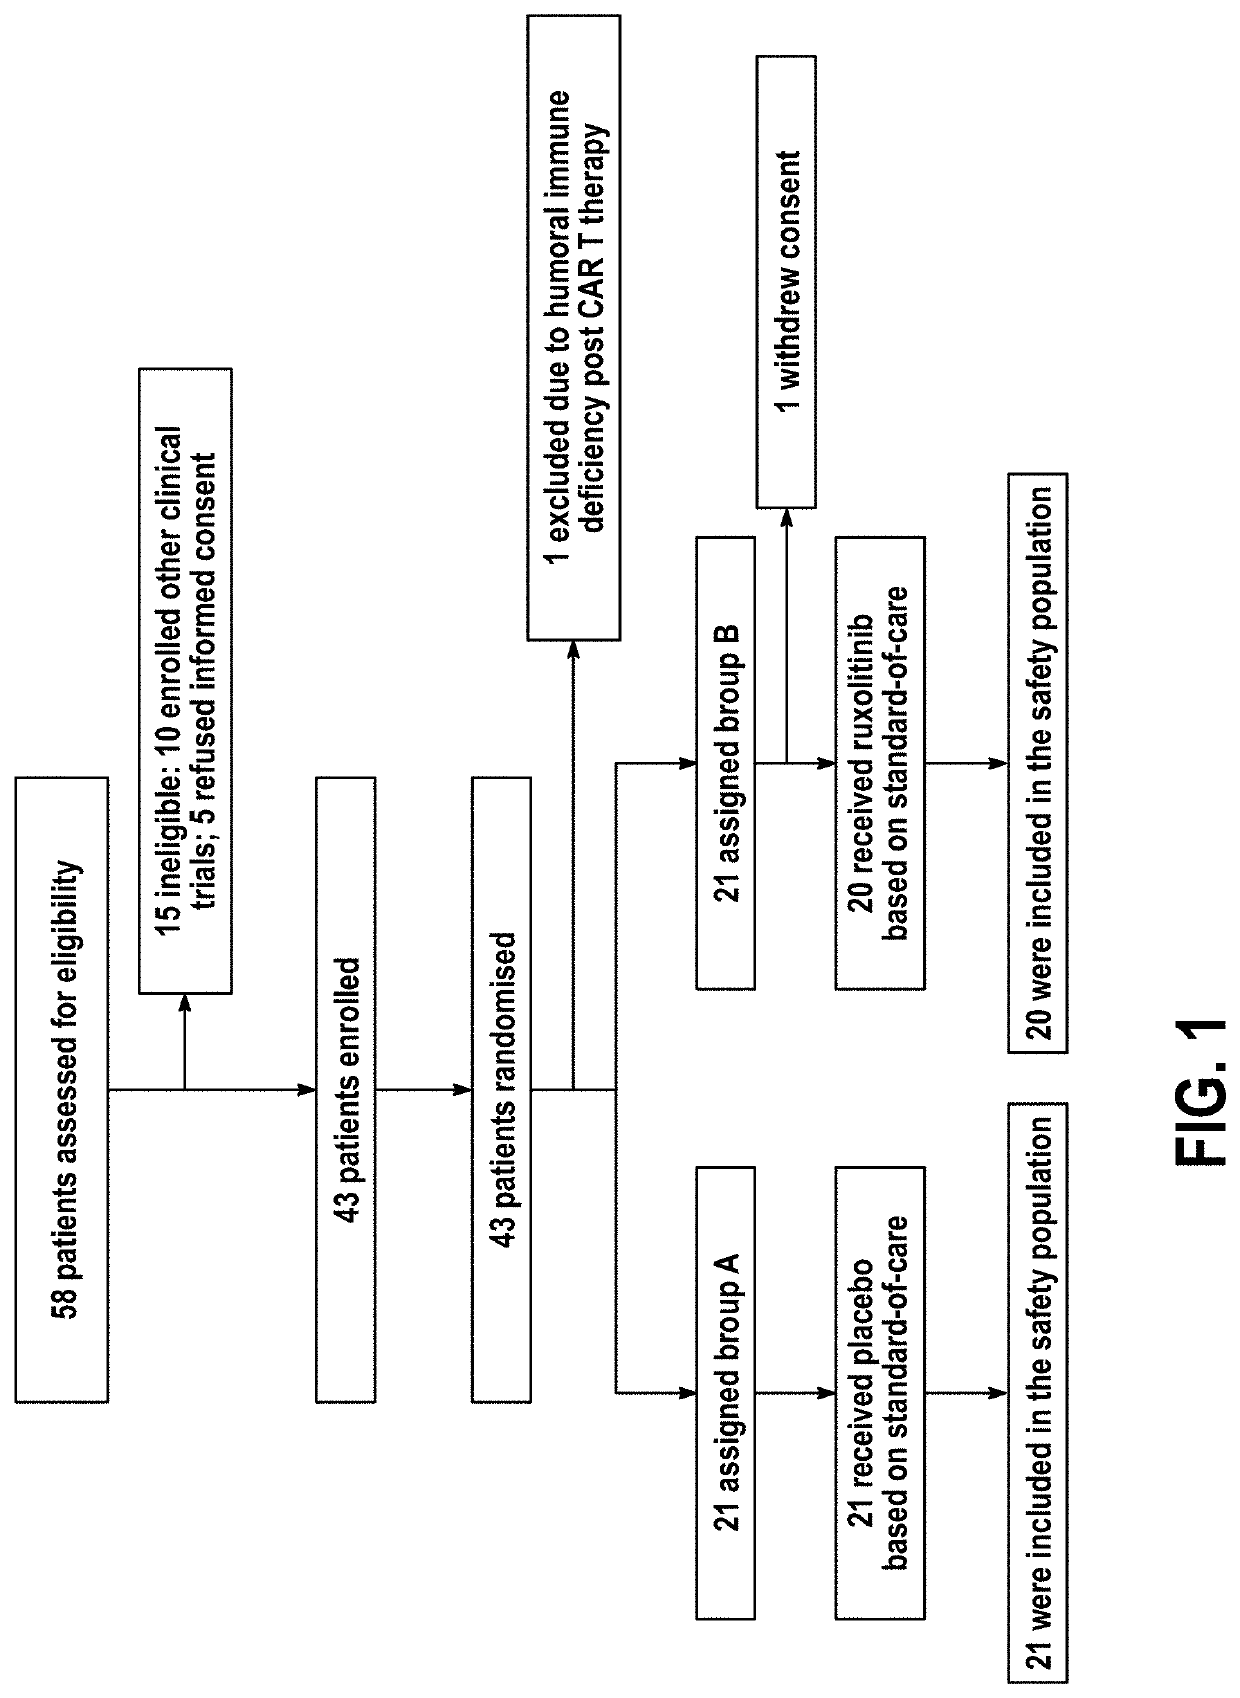 Compositions and methods for the treatment of severe acute respiratory syndrome coronavirus 2 (sars-cov-2) infection